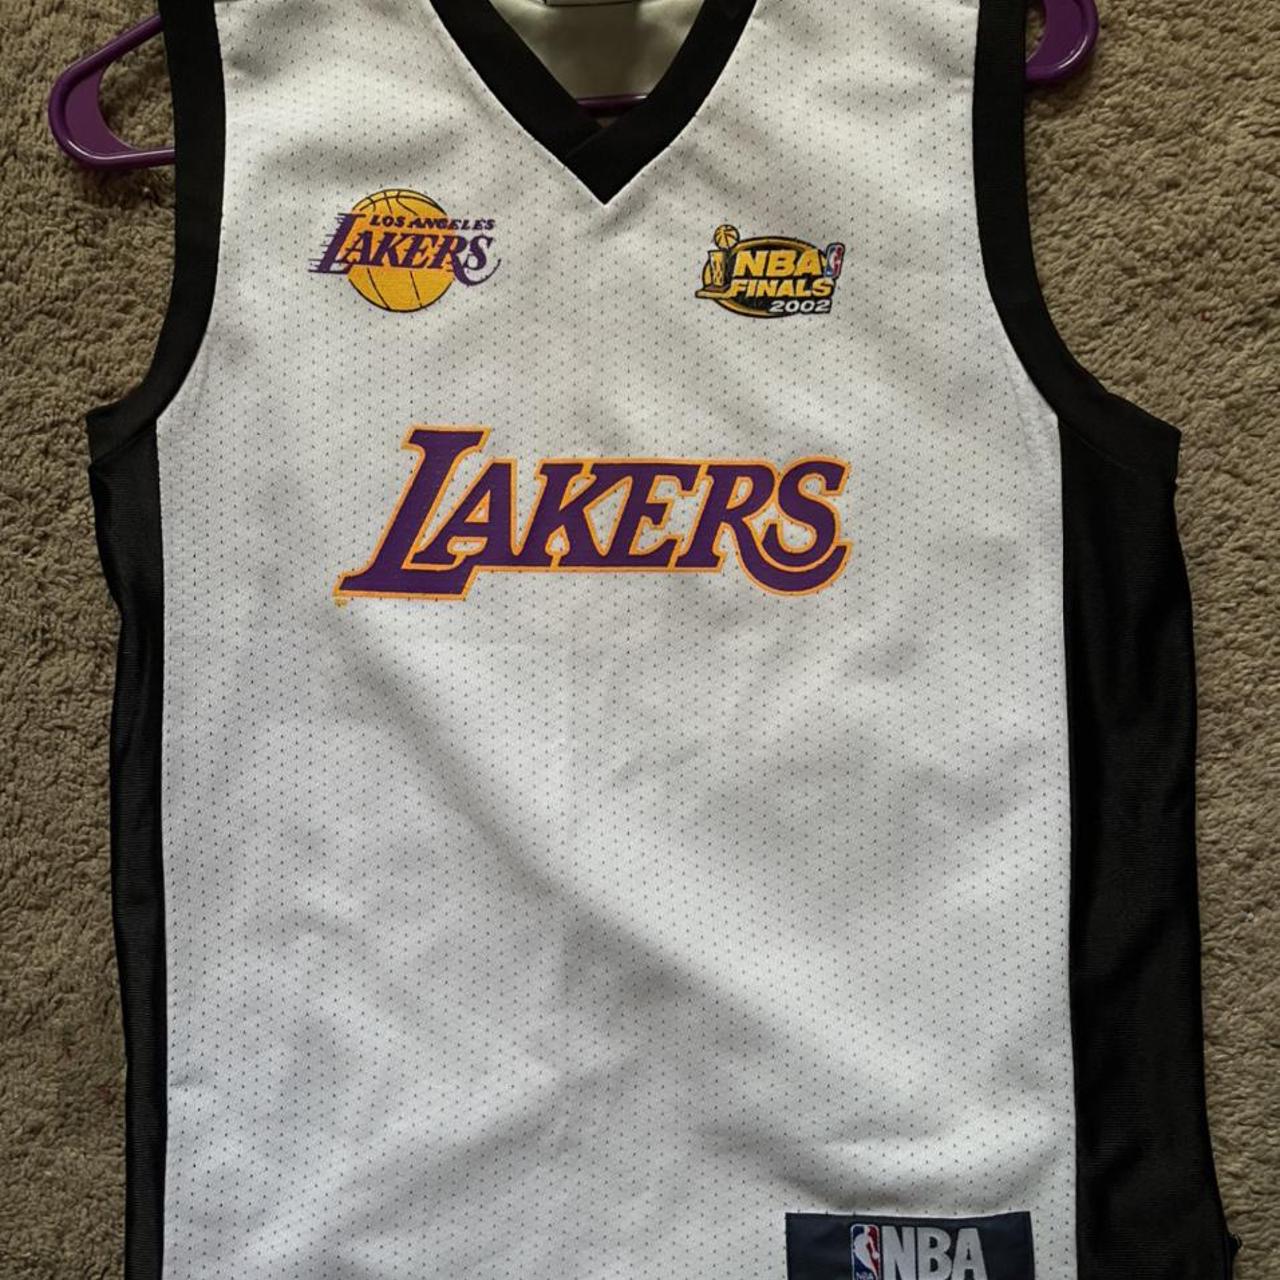 Dual colored Kobe jersey from the 2002 finals. Super - Depop